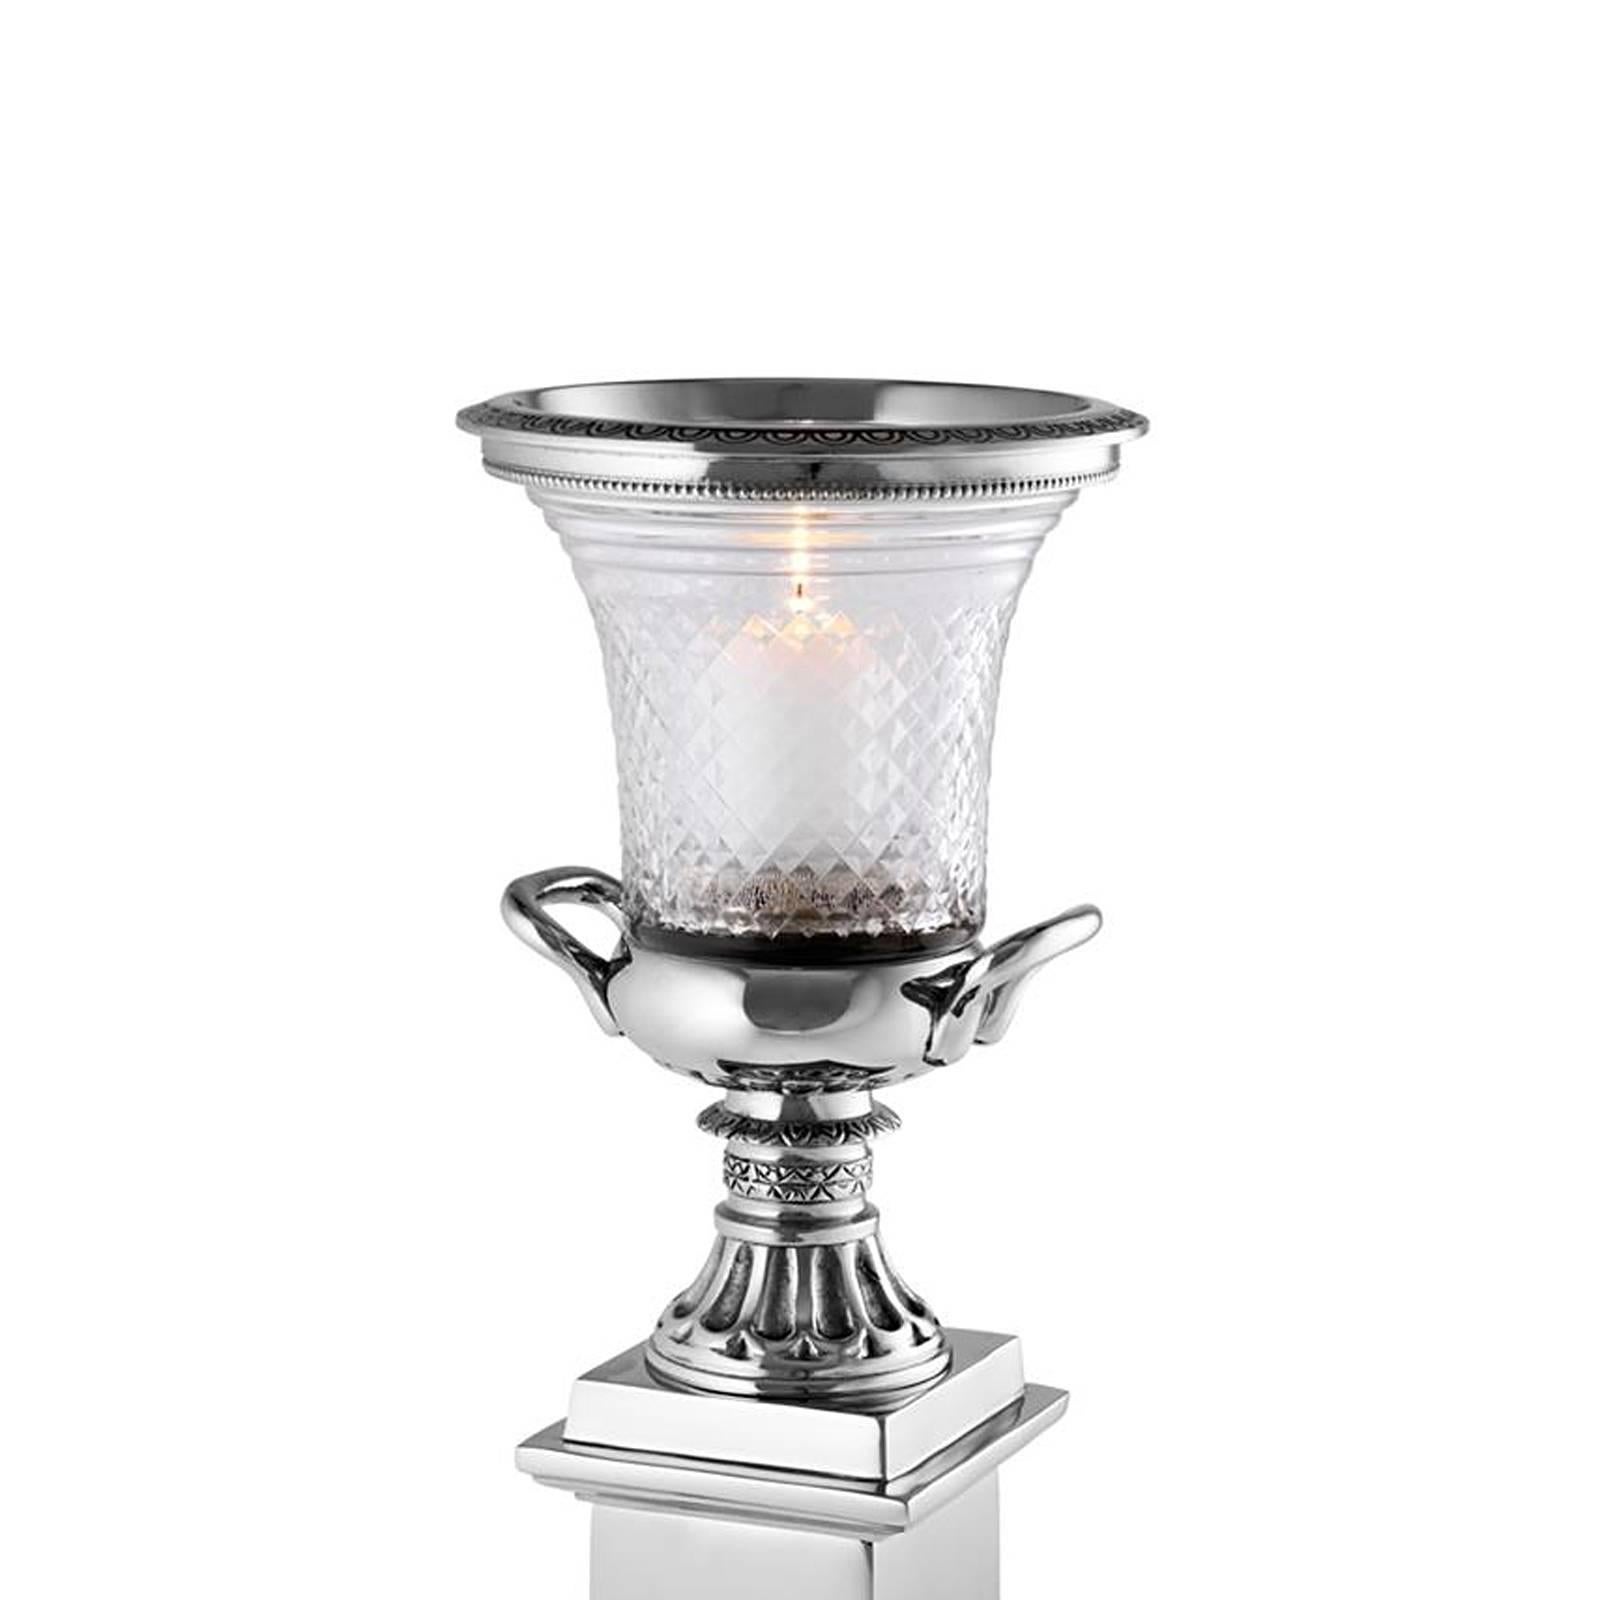 Hurricaine Jersey in polished nickel finish with 
hand cut-glass. For one candle. Candle not included.
